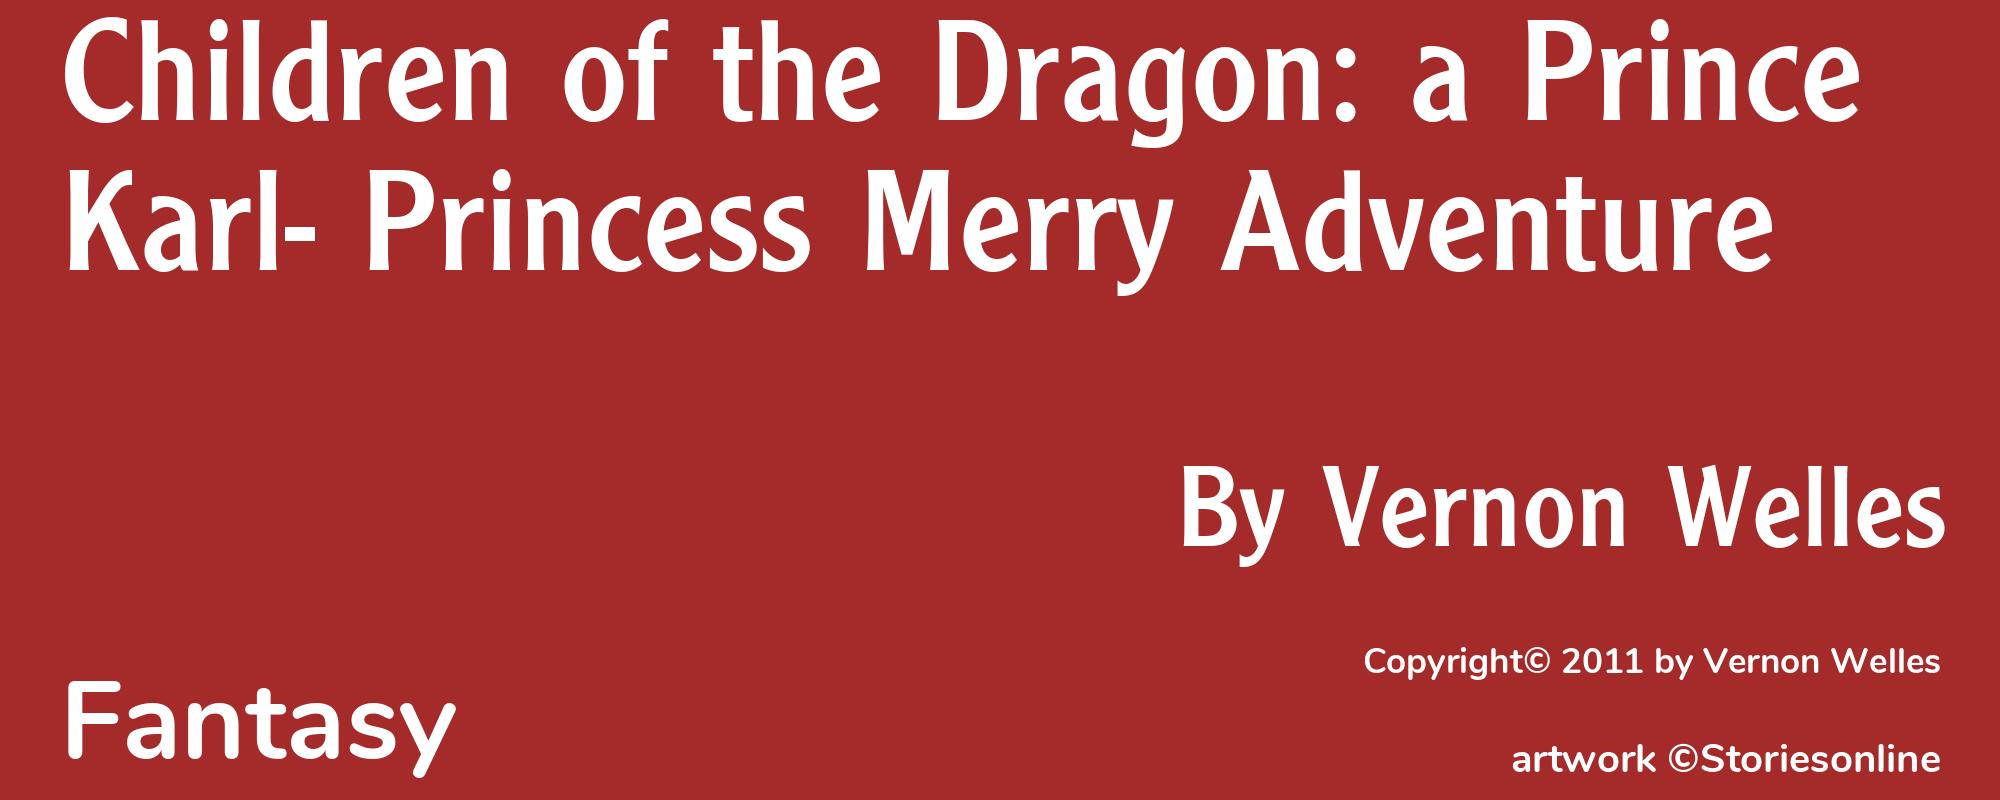 Children of the Dragon: a Prince Karl- Princess Merry Adventure - Cover